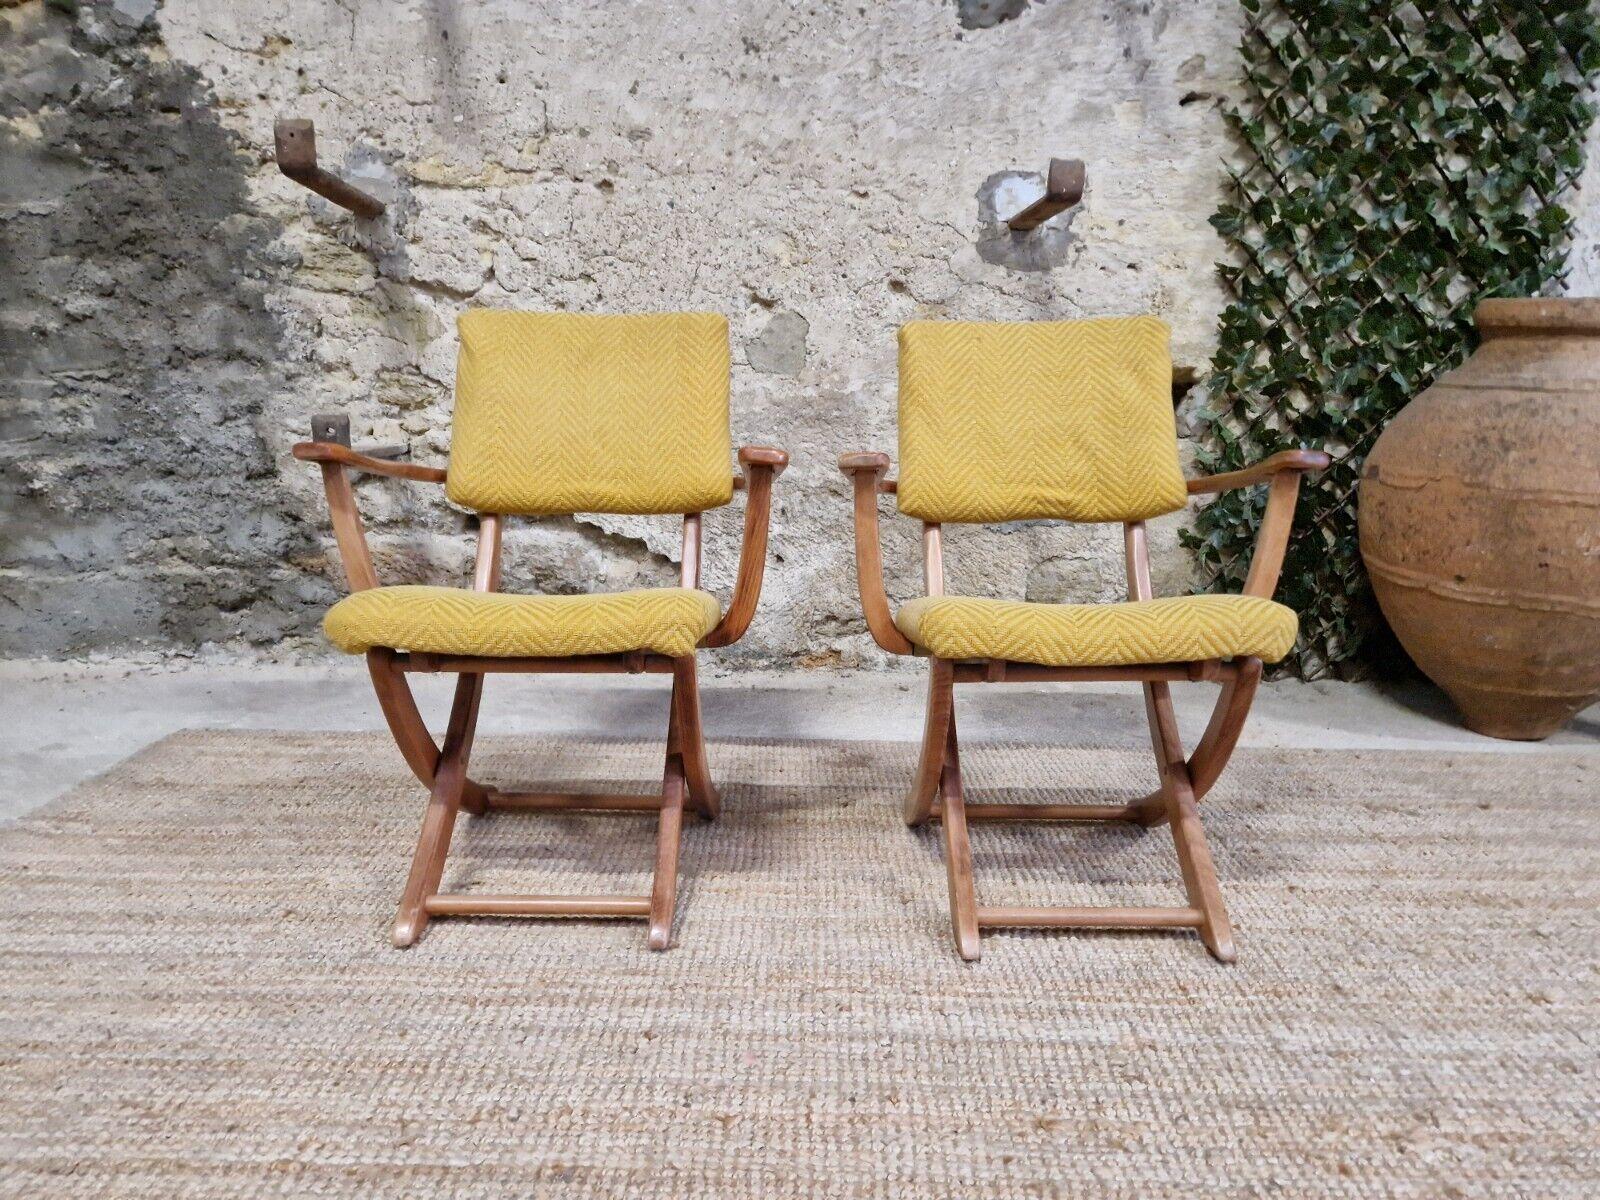 Introducing a stunning pair of Rocaille armchairs from Denmark, crafted from high-quality teak wood with a smooth finish. The beautiful yellow colour of these chairs adds a pop of brightness to any indoor space, and their foldable design makes them